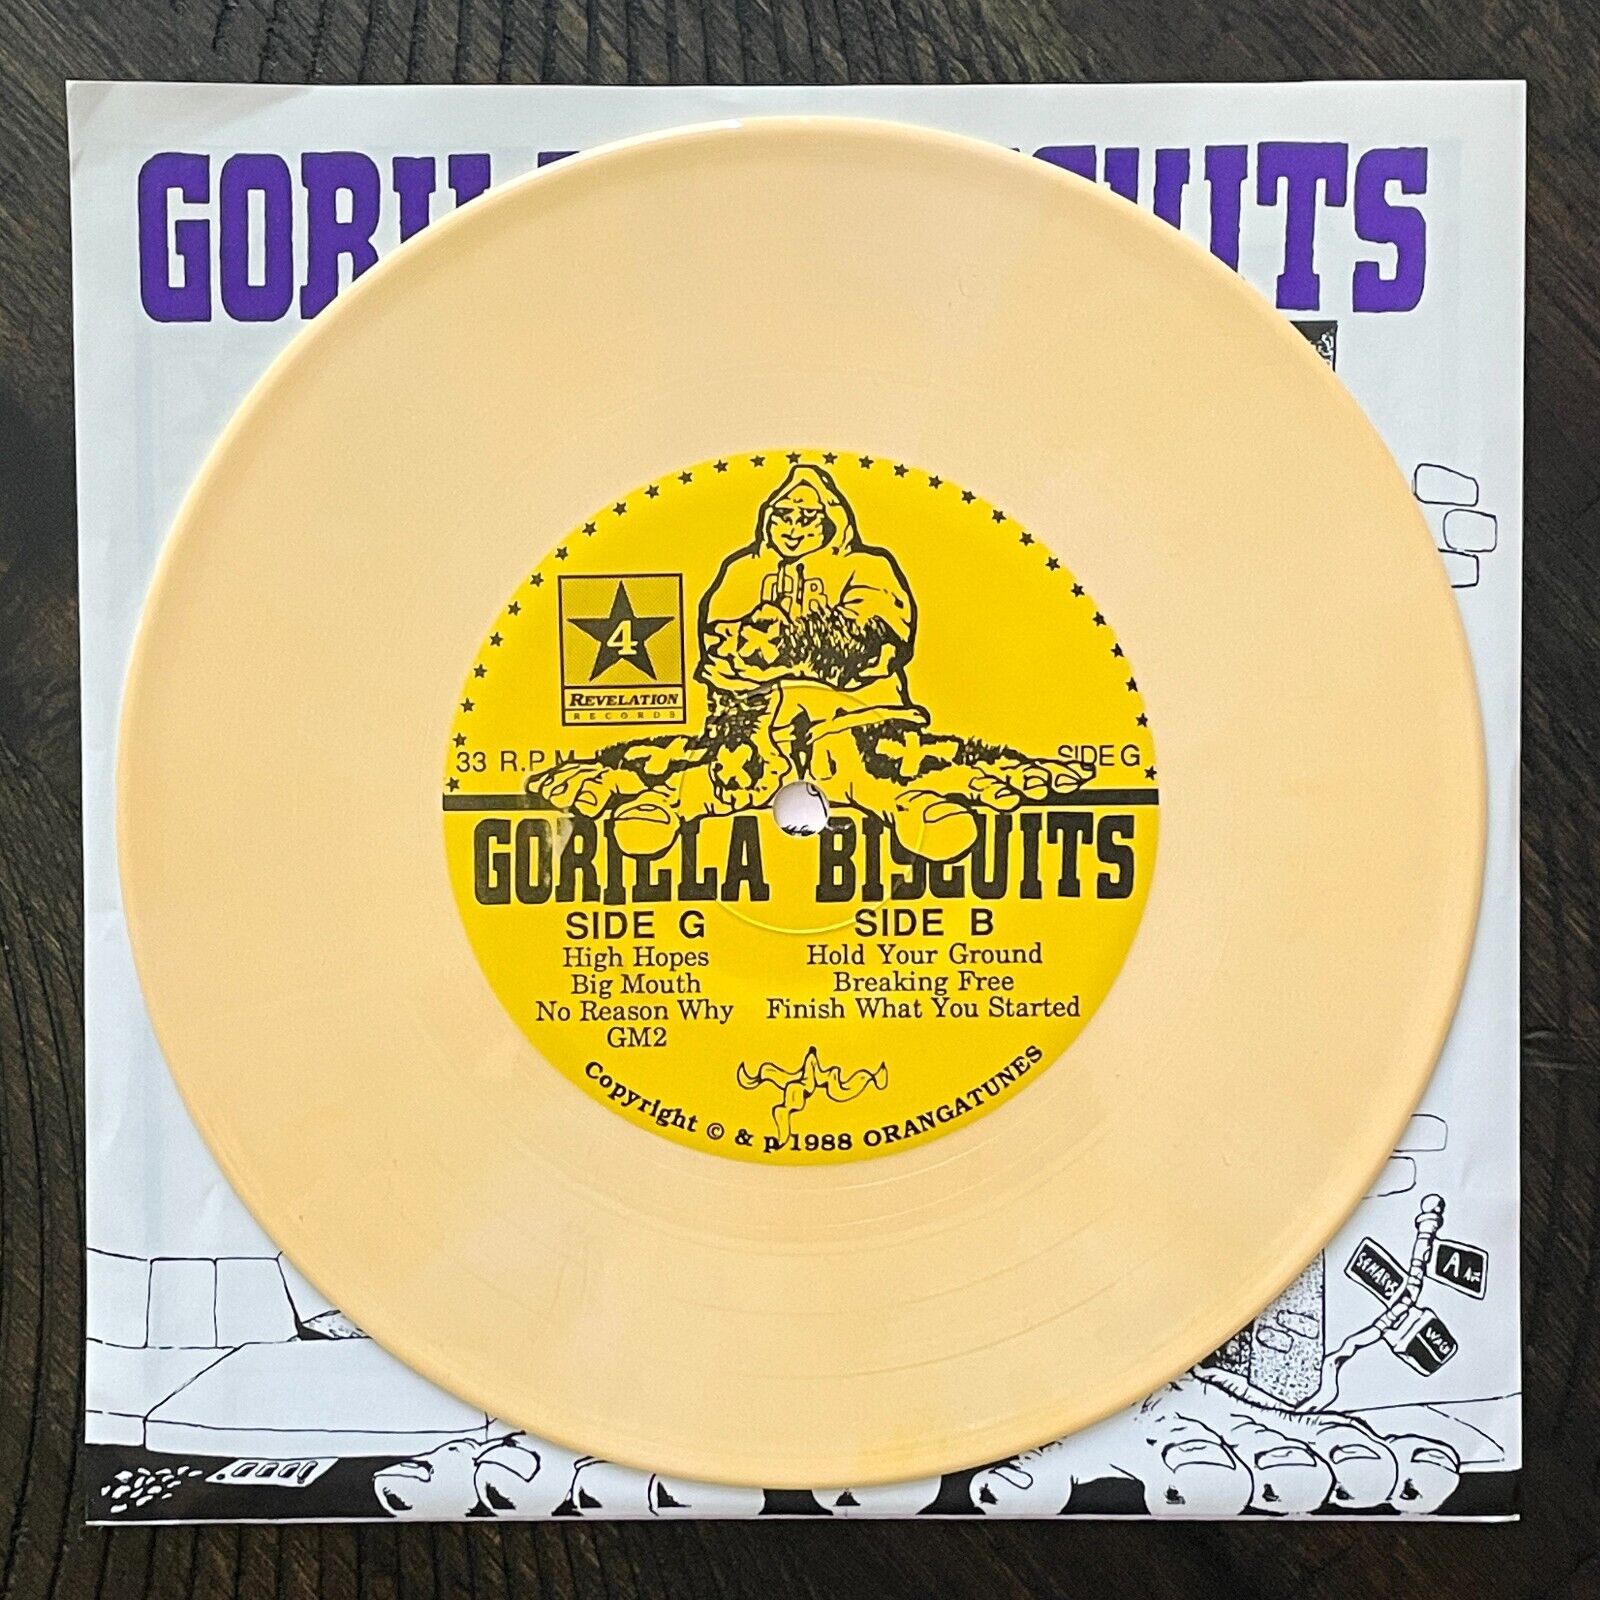 Pic 1 GORILLA BISCUITS 7" EP WHITE YELLOW 1988 KBD Judge Quicksand Youth Of Today sXe